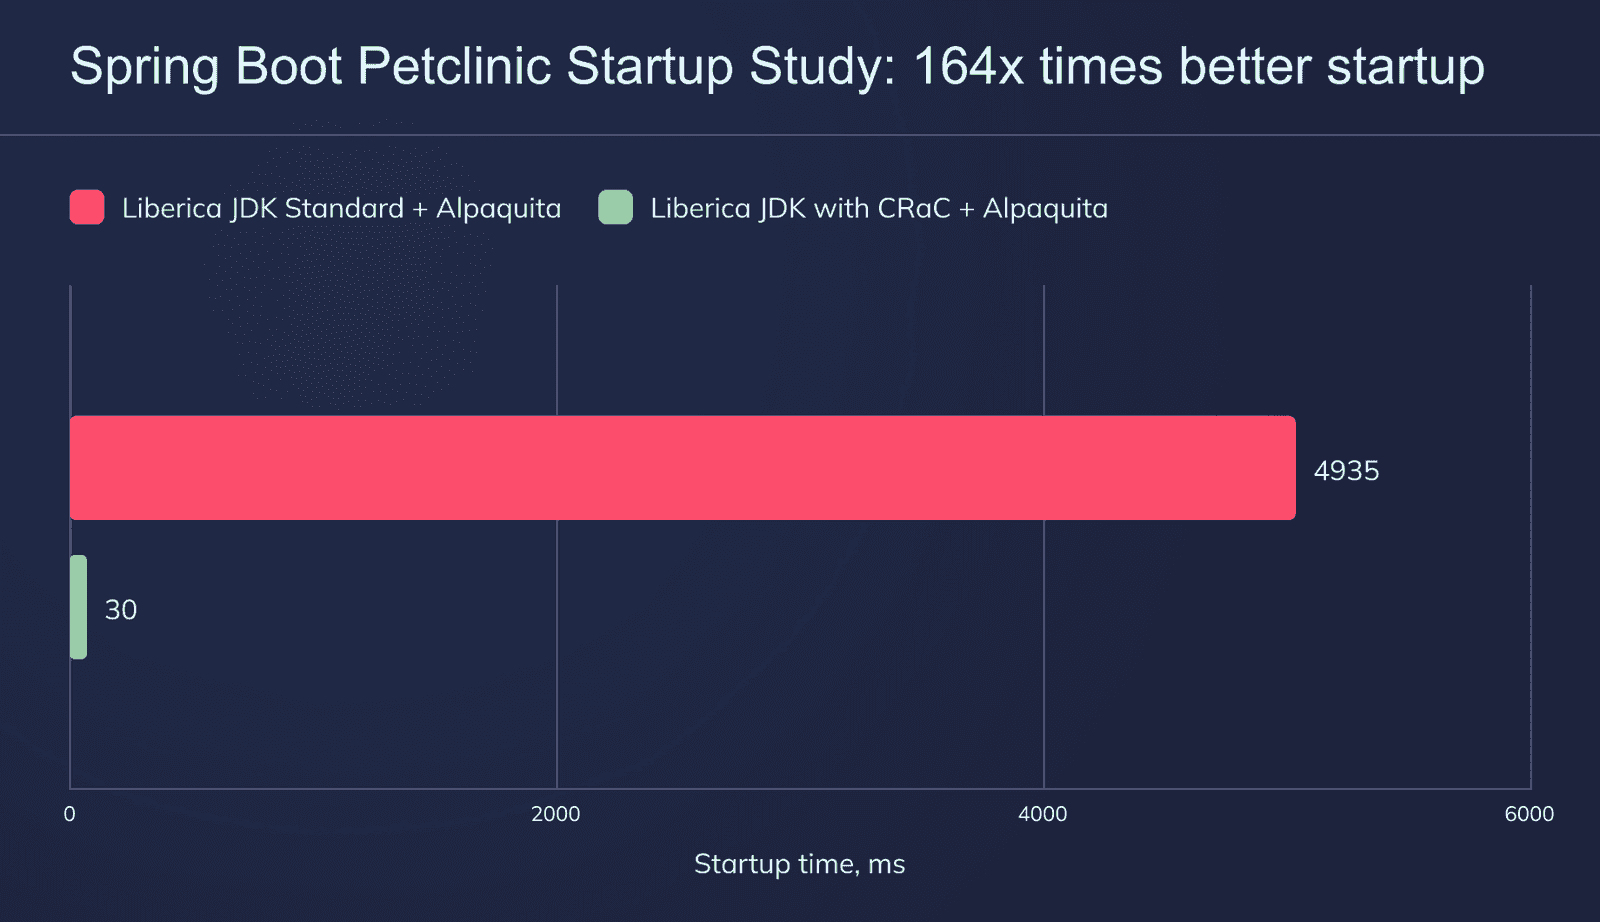 spring-boot-petclinic-startup-study-164x-times-better-startup